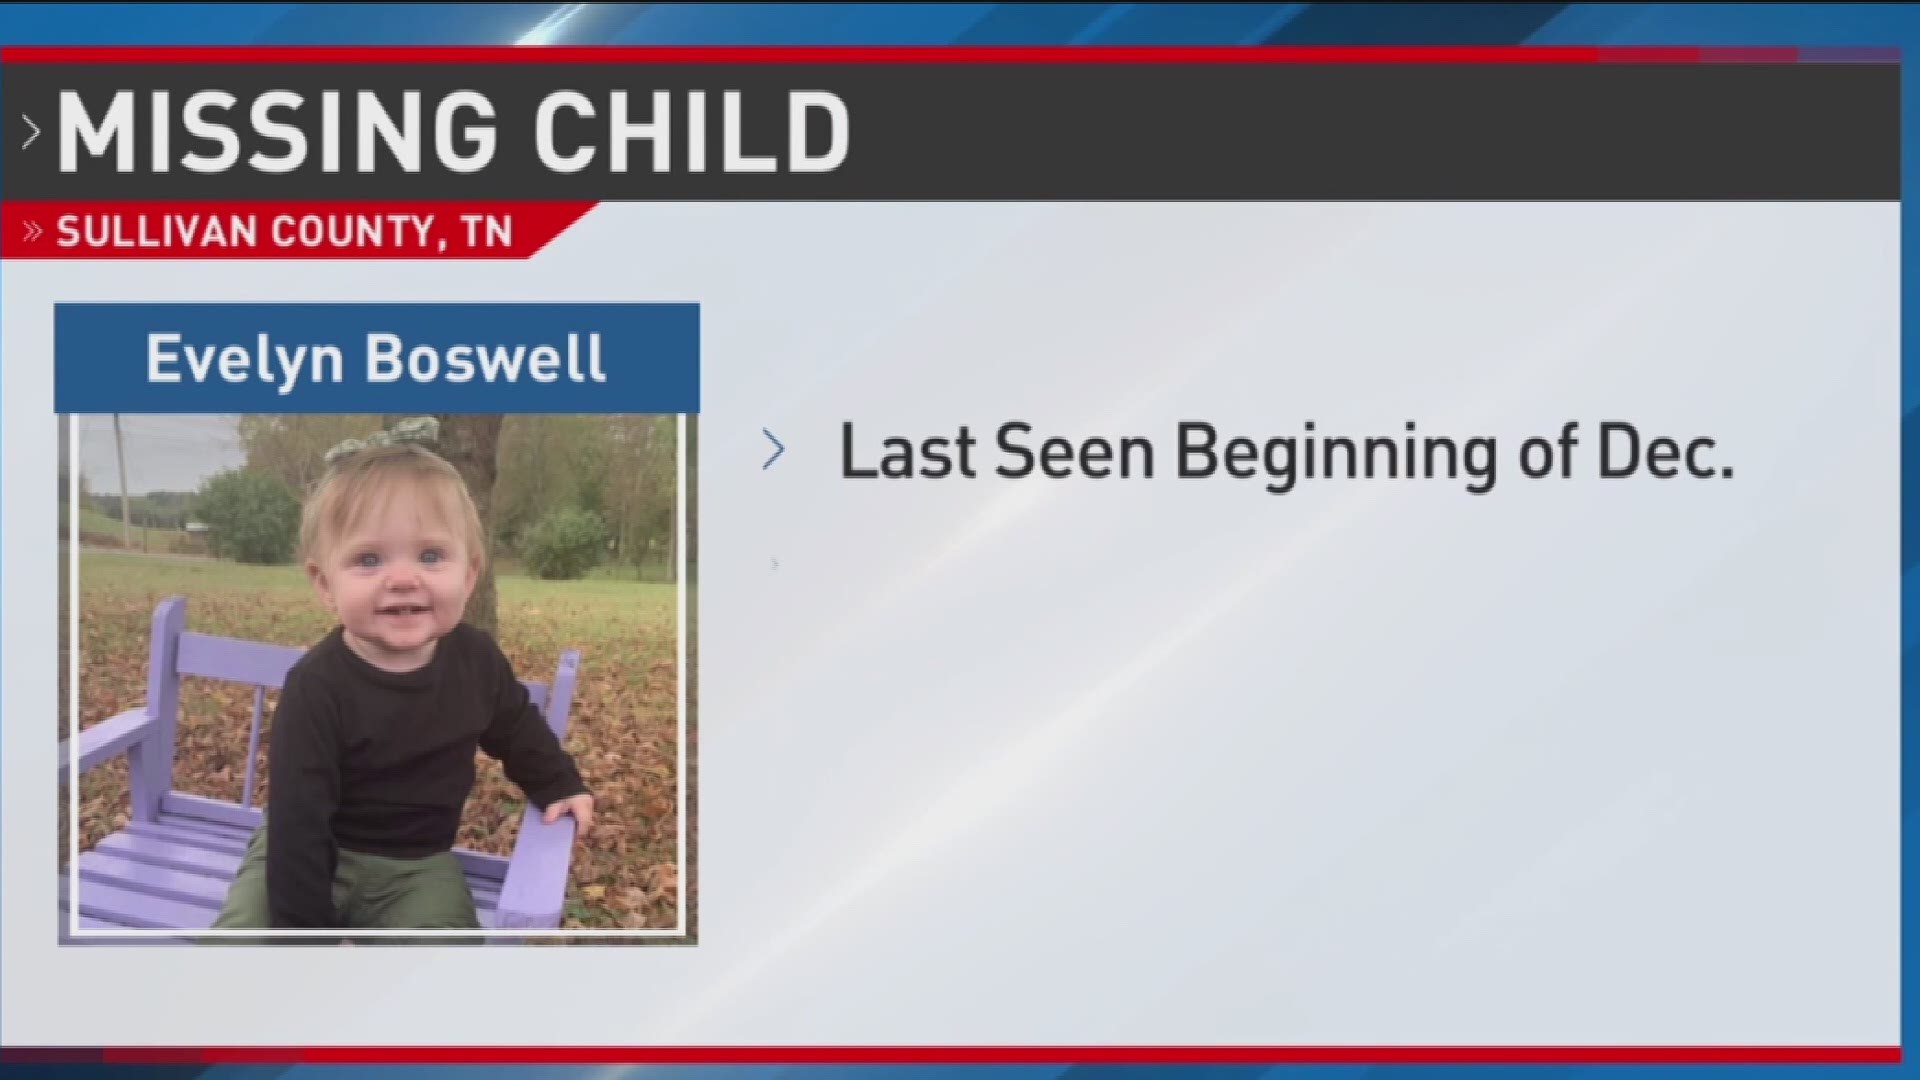 The TBI has issued an AMBER Alert to find 15-month-old Evelyn Boswell.